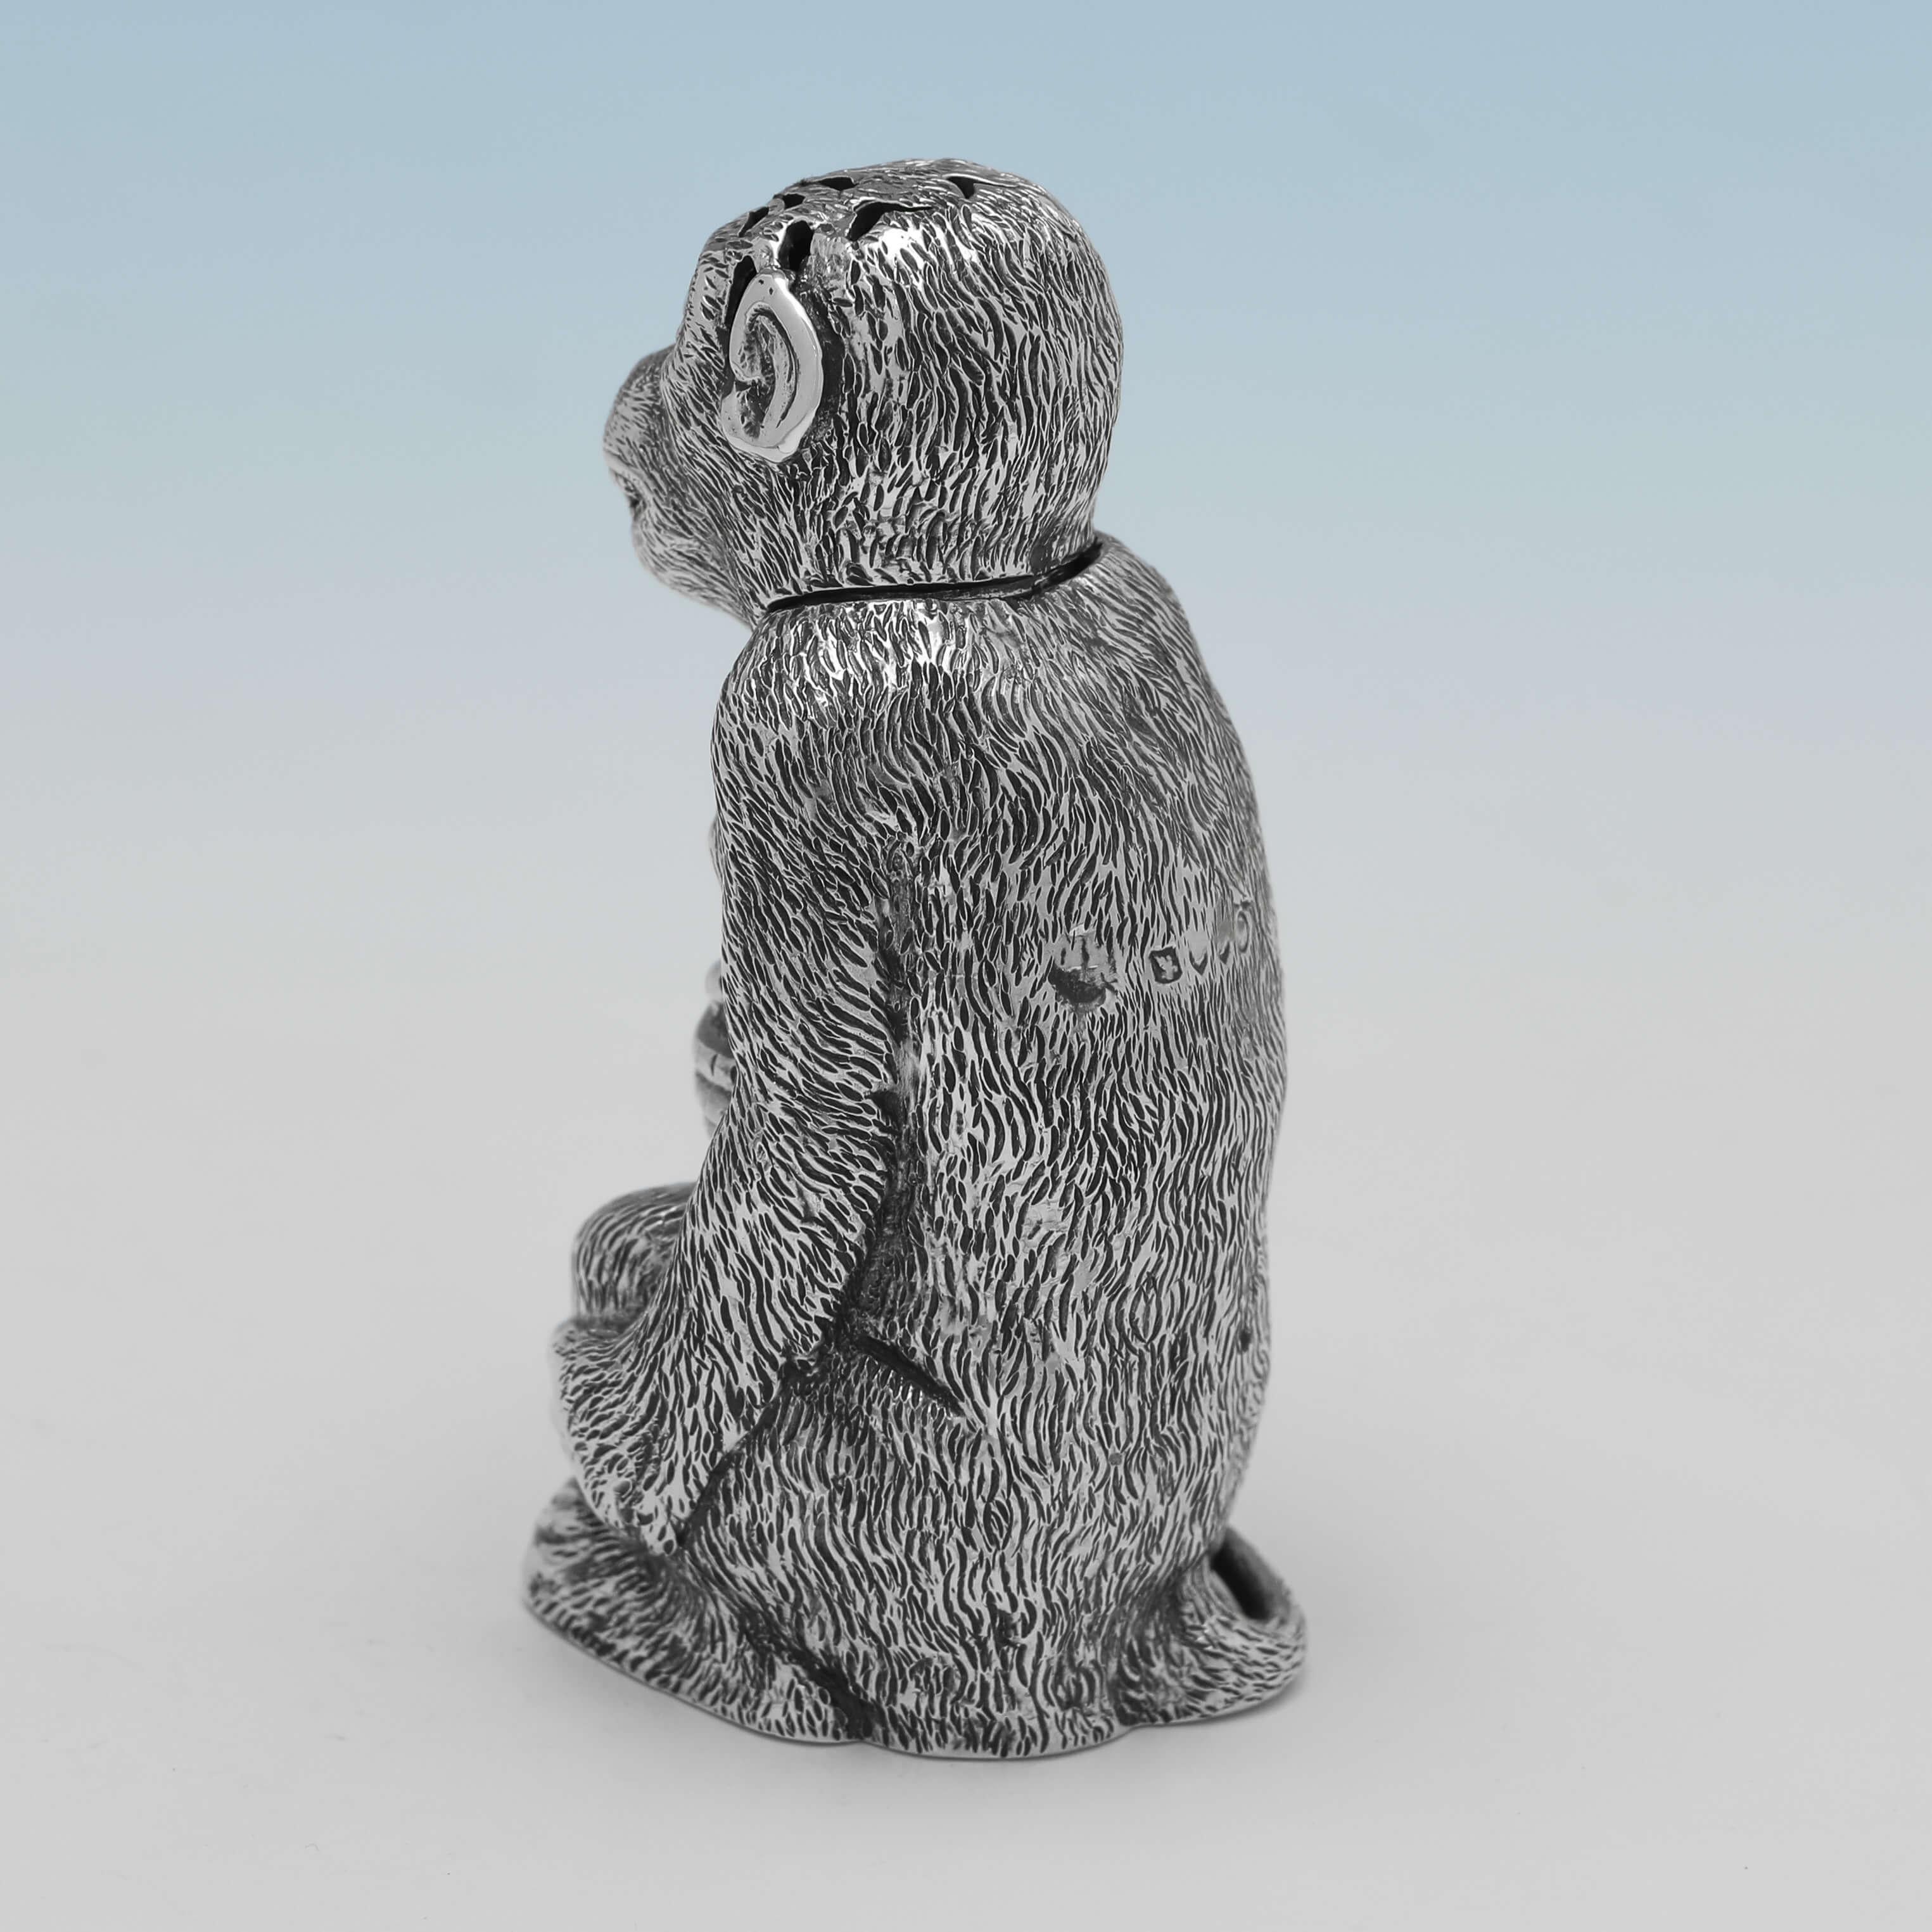 Hallmarked in London in 1881, this charming and very rare, Victorian, Antique Sterling Silver Pepper Pot, is modelled as a Monkey. 

The pepper pot measures 2.75